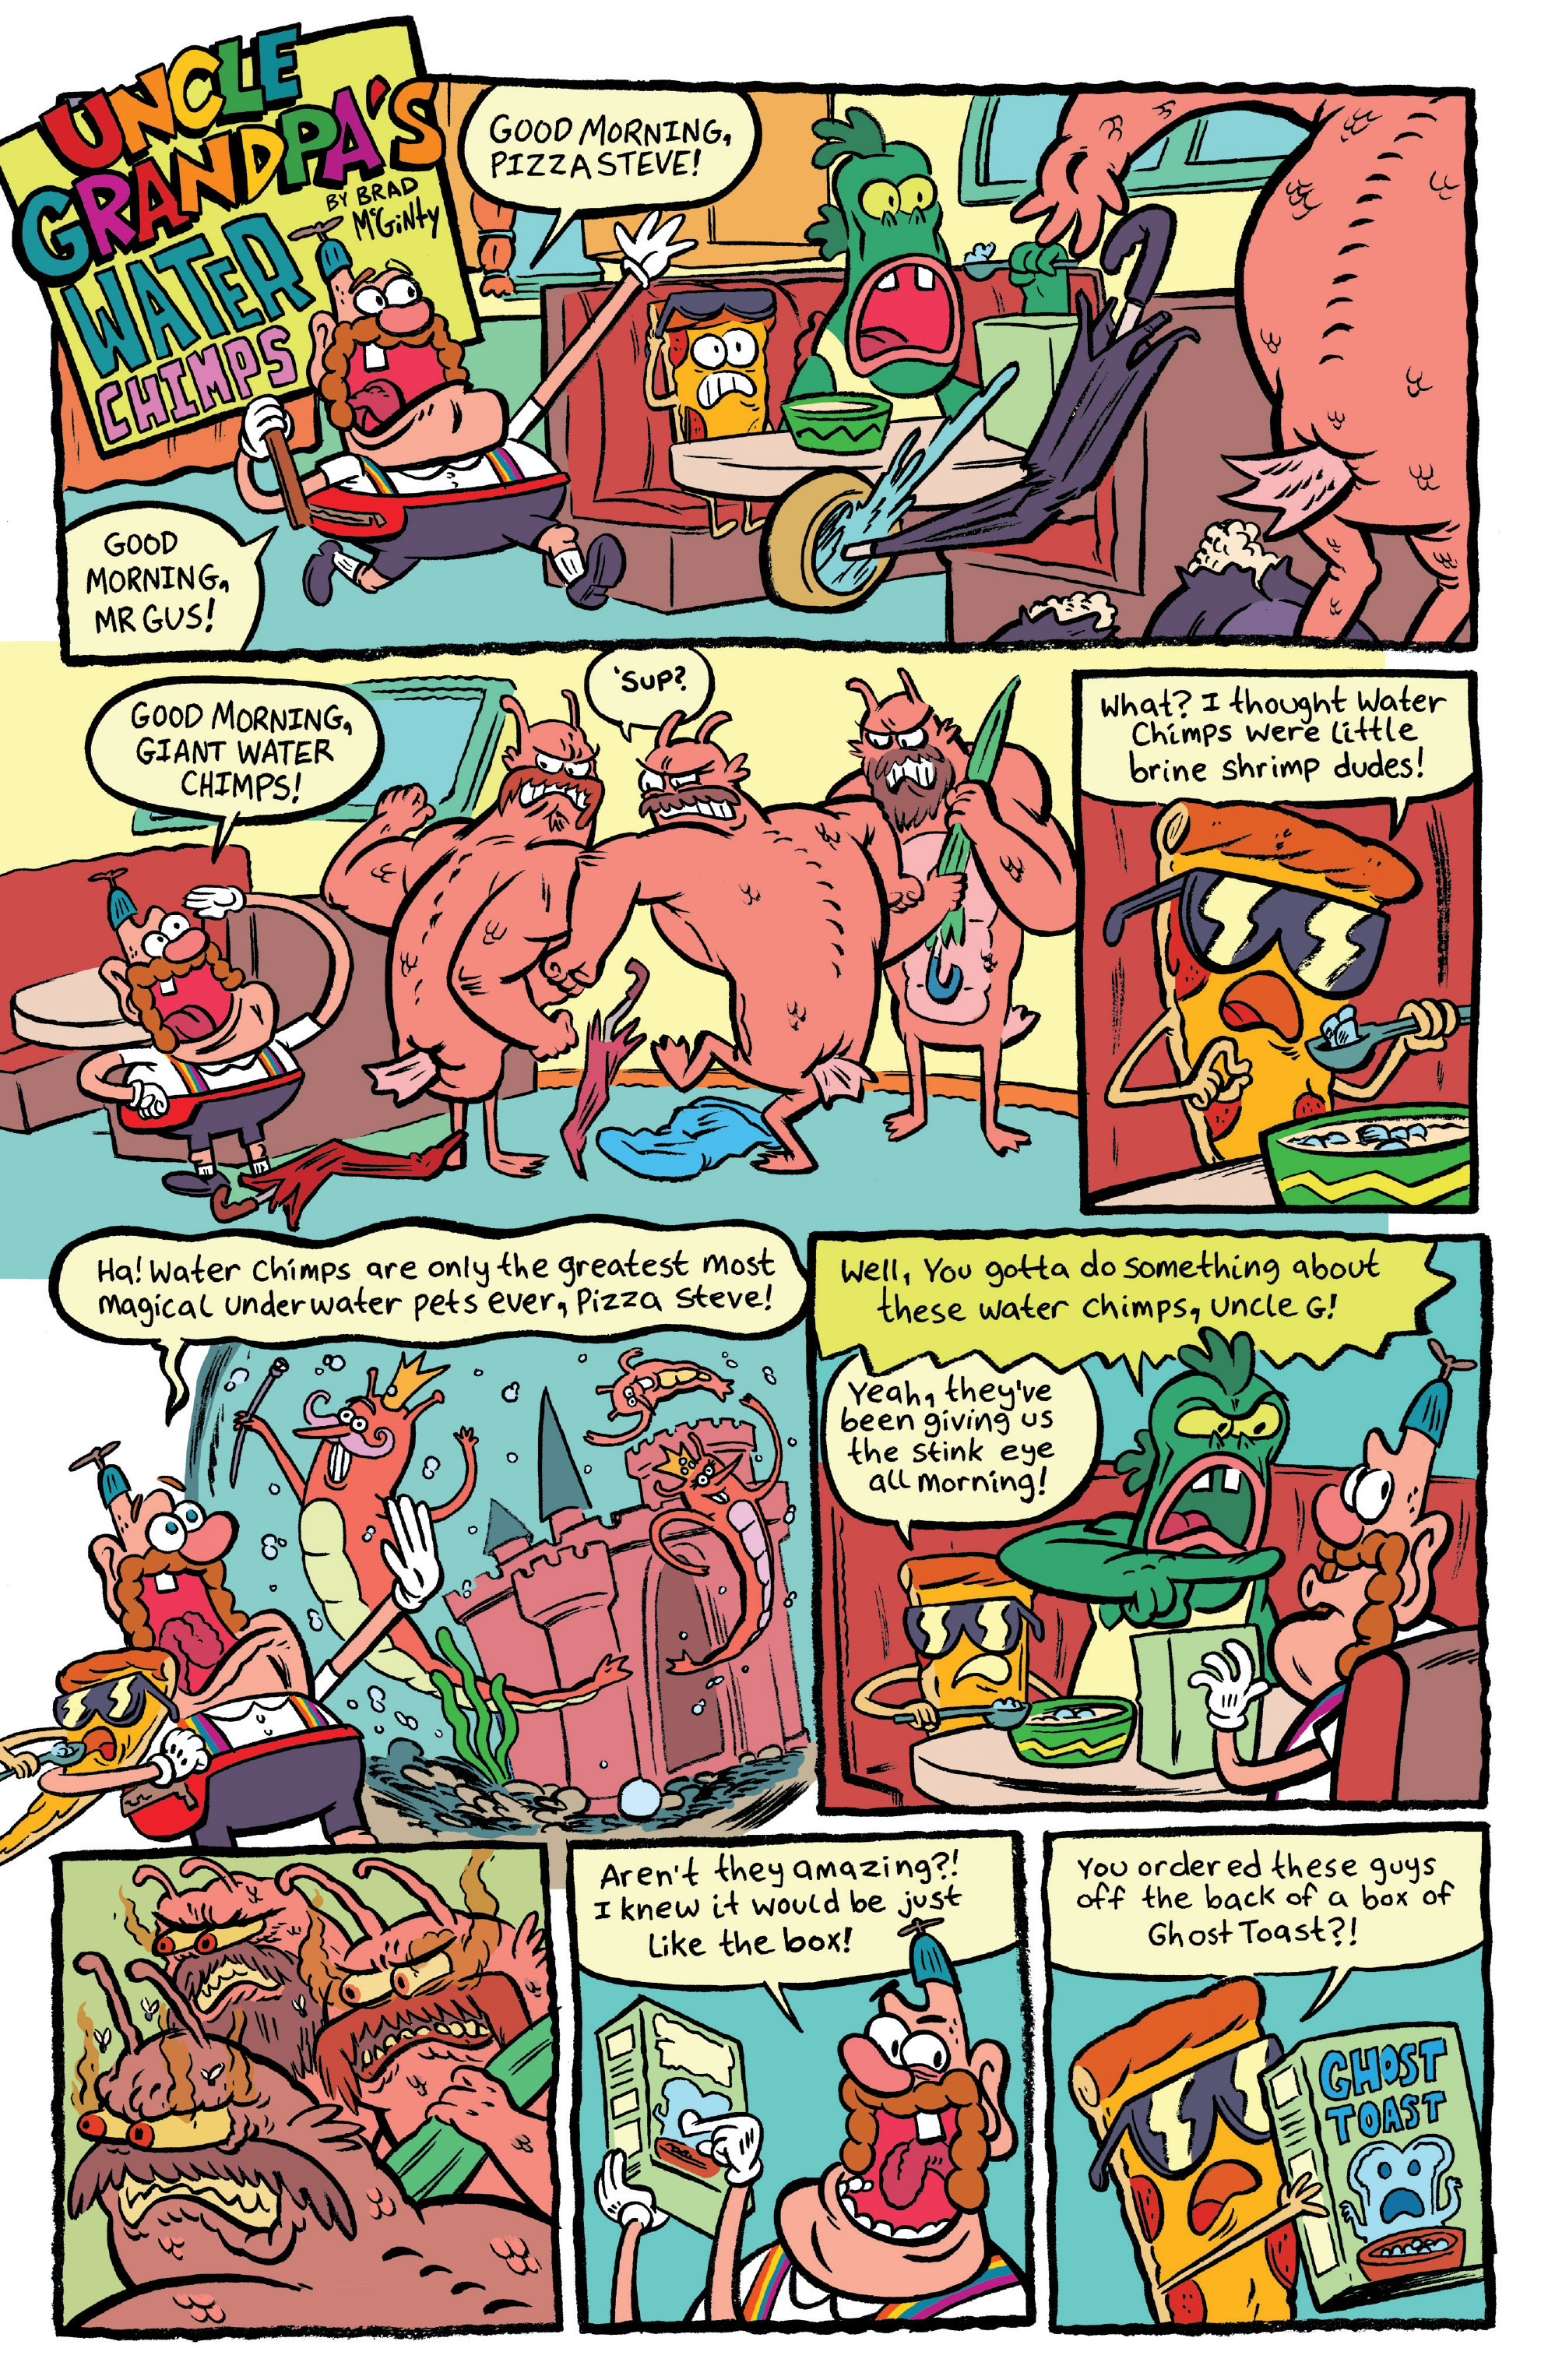 Read online Uncle Grandpa: Pizza Steve Special comic -  Issue # Full - 11